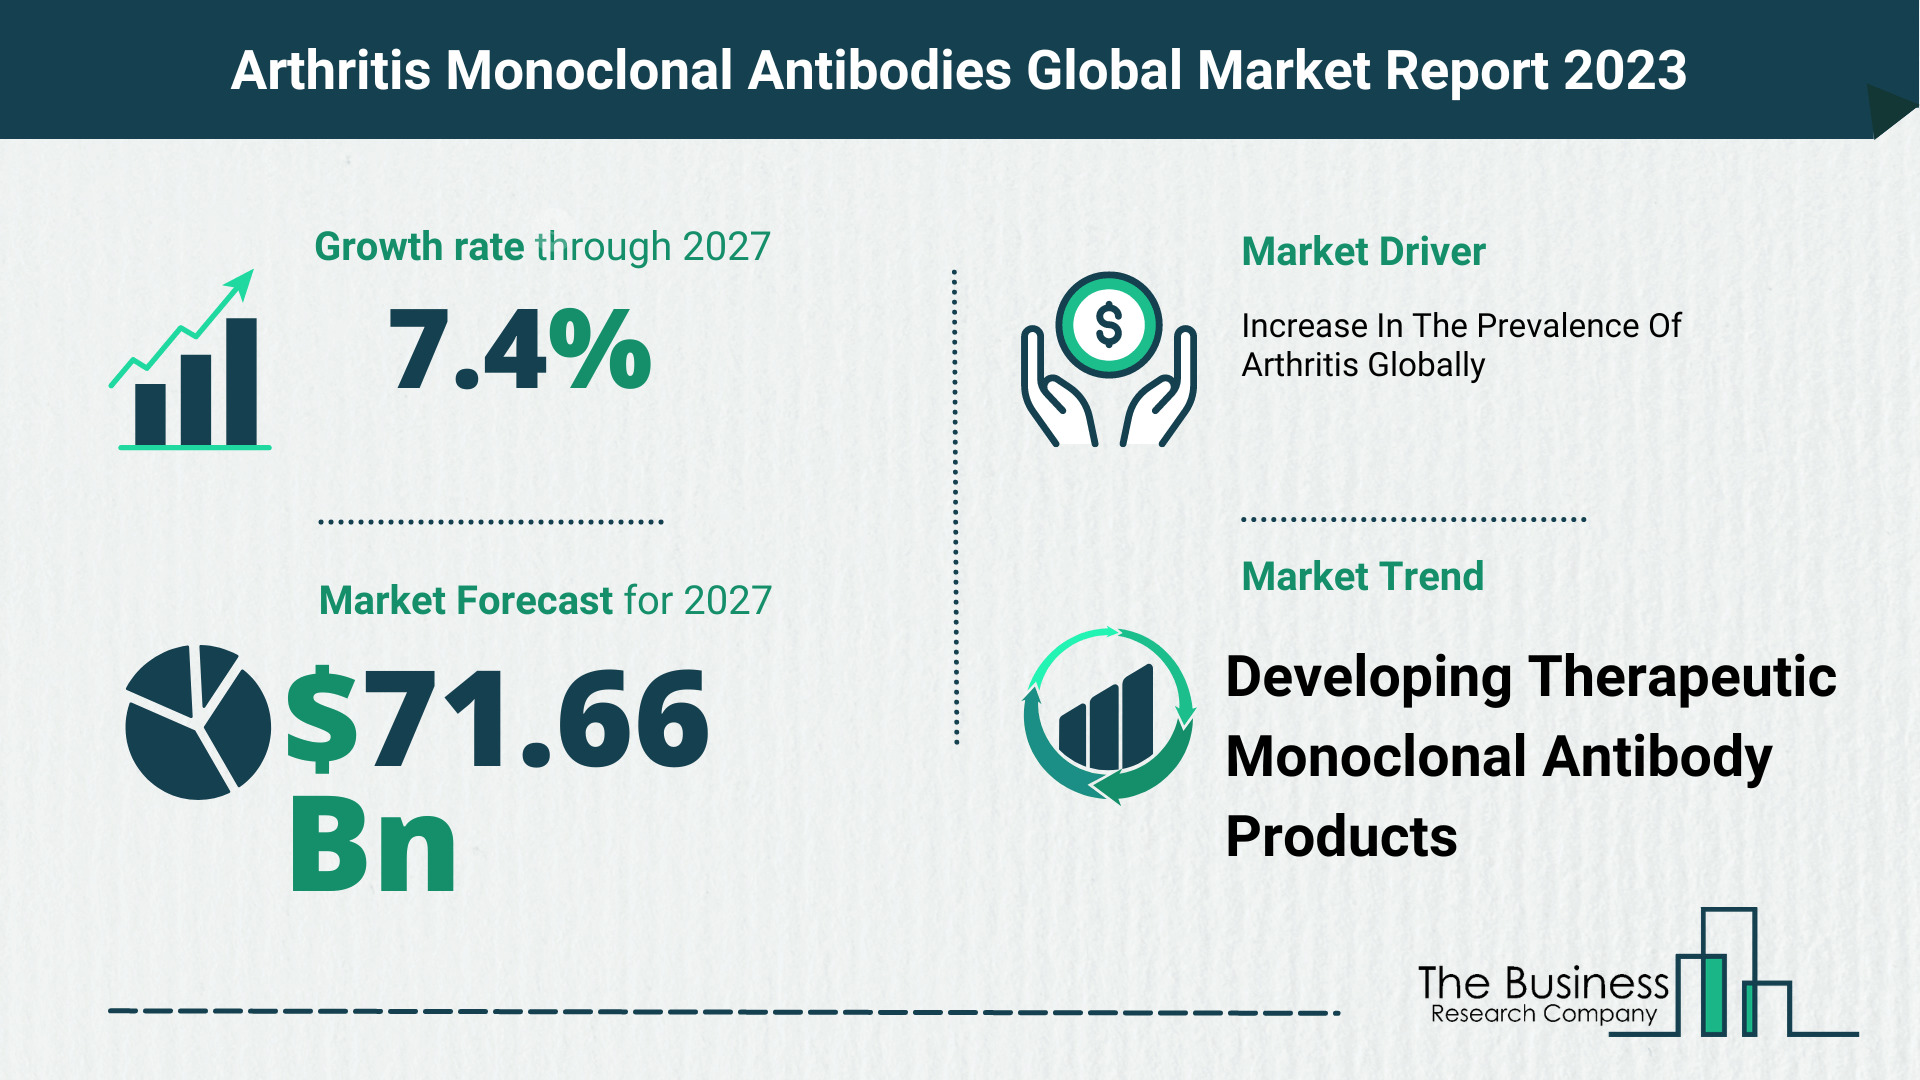 How Will The Arthritis Monoclonal Antibodies Market Globally Expand In 2023?